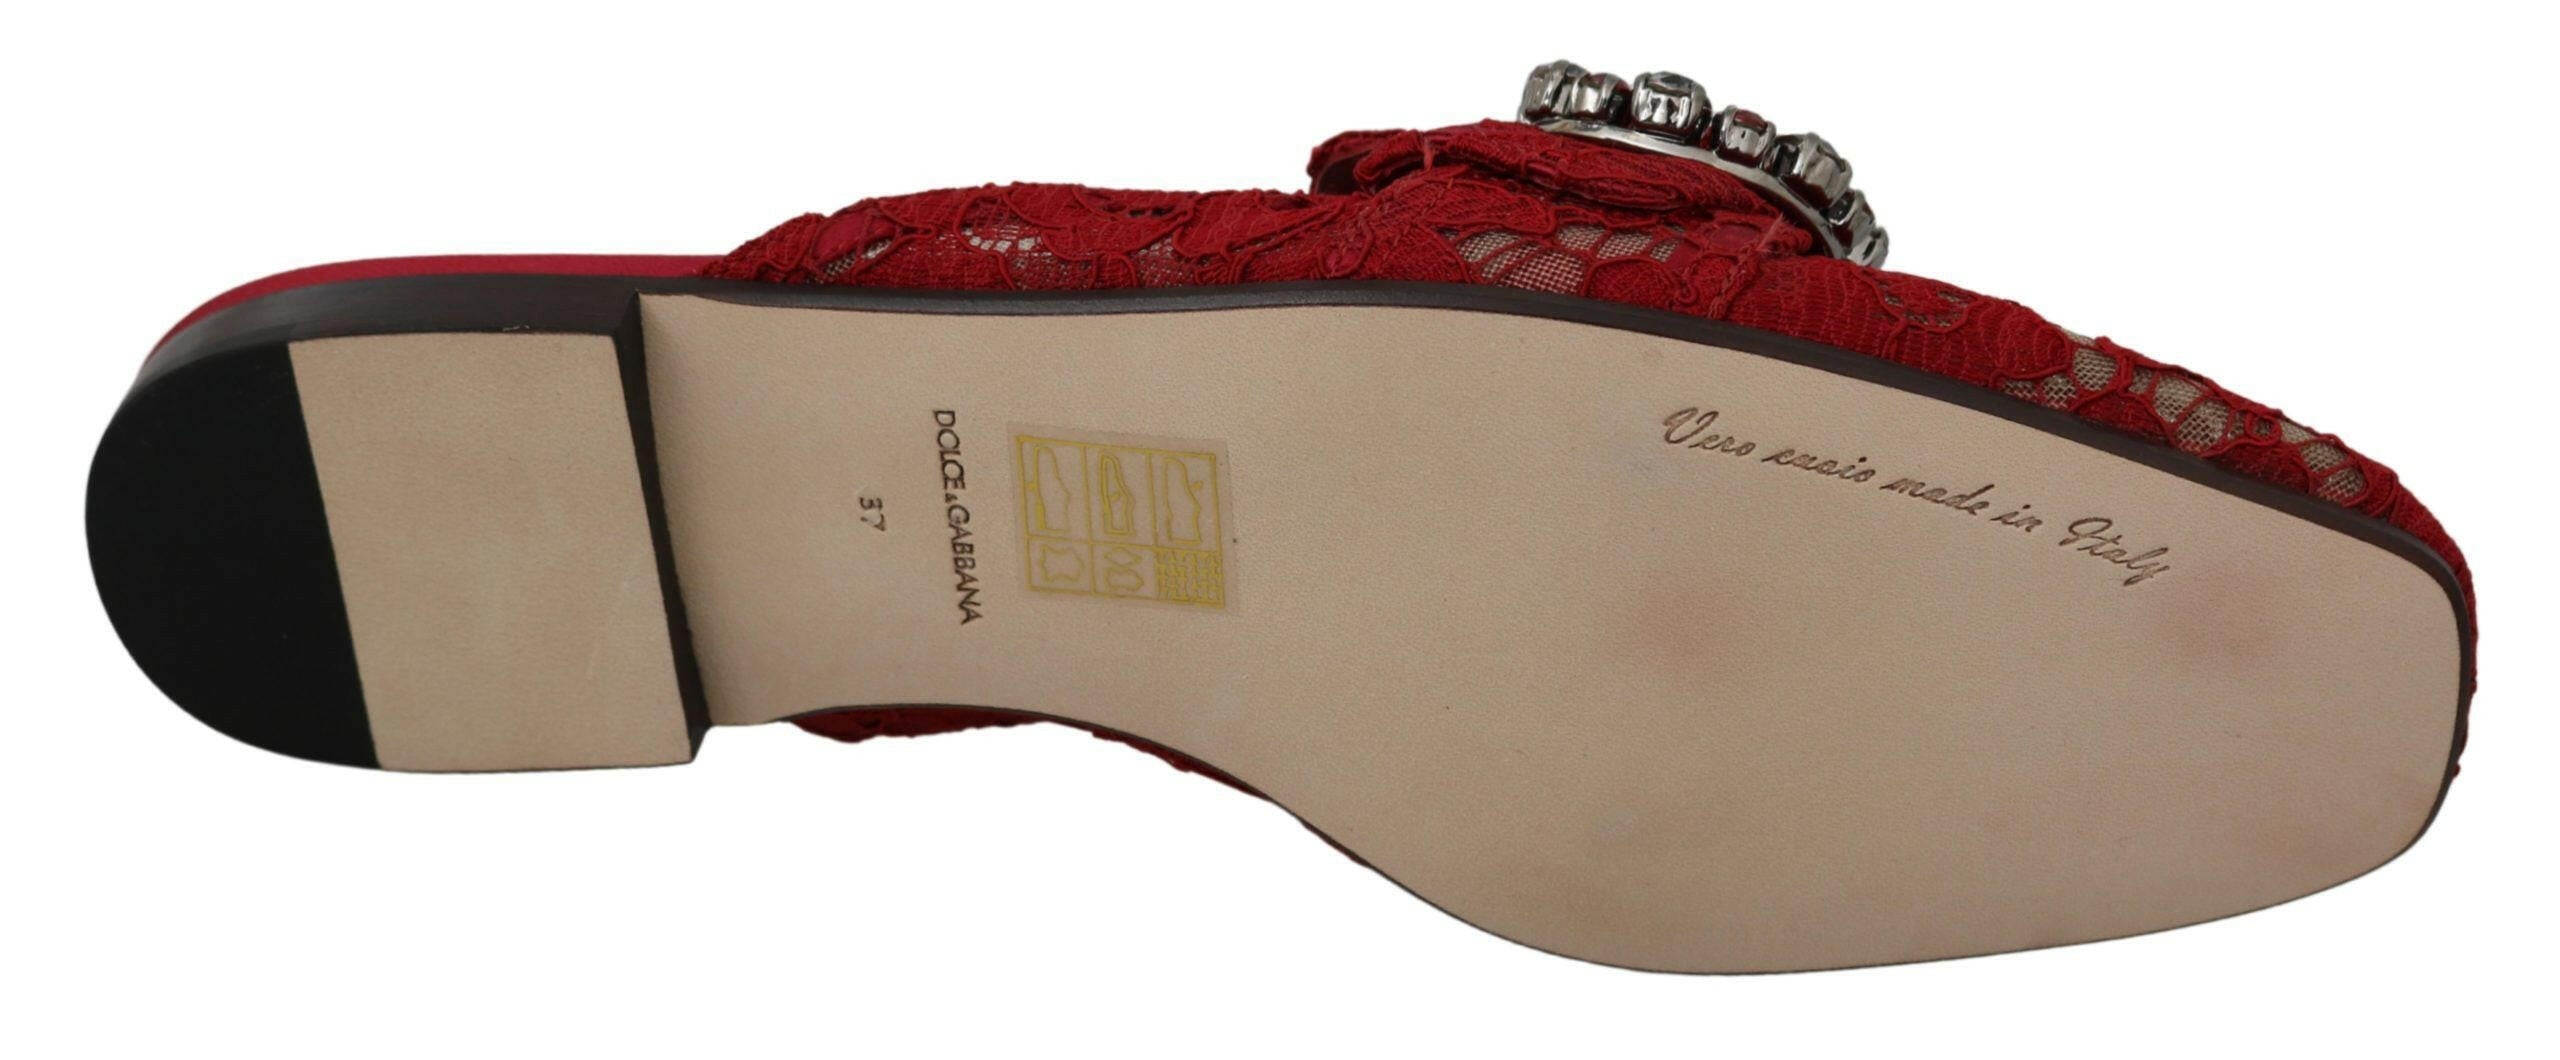 Dolce & Gabbana Red Lace Crystal Slide On Flats Shoes - GENUINE AUTHENTIC BRAND LLC  